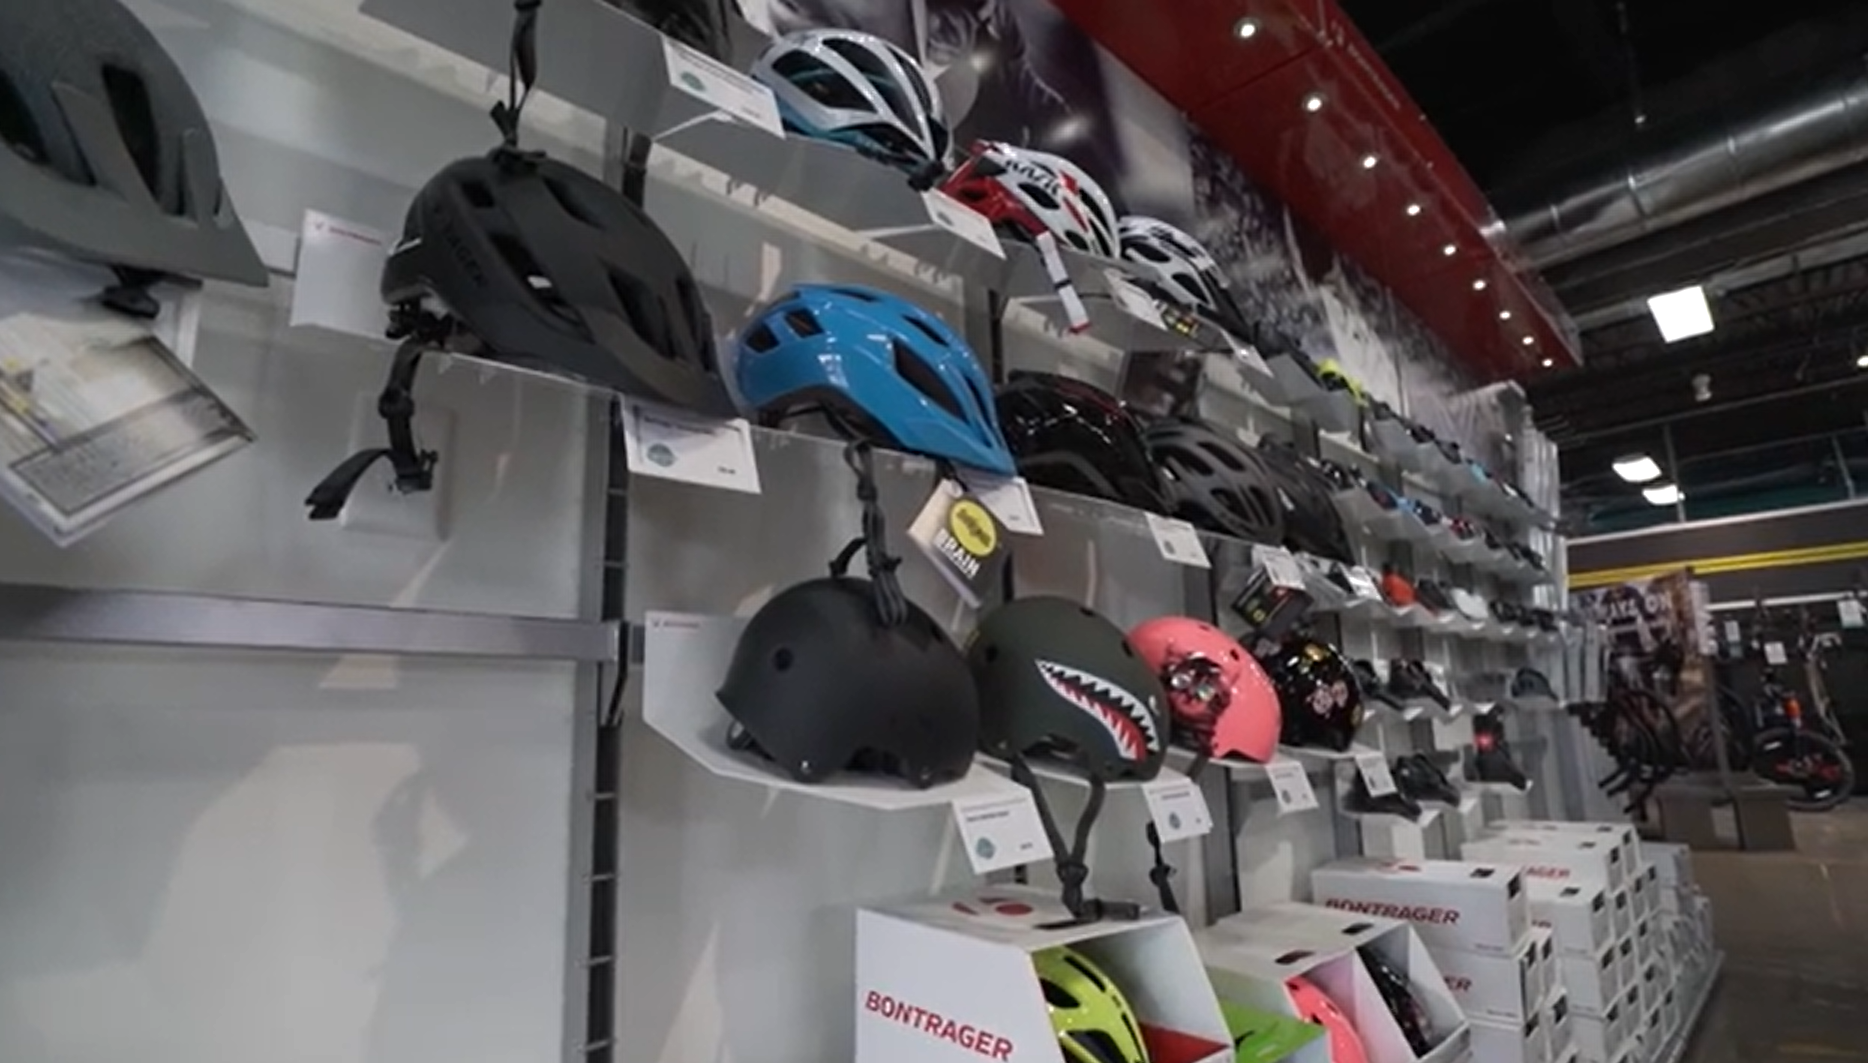 Shopping for bicycle helmets